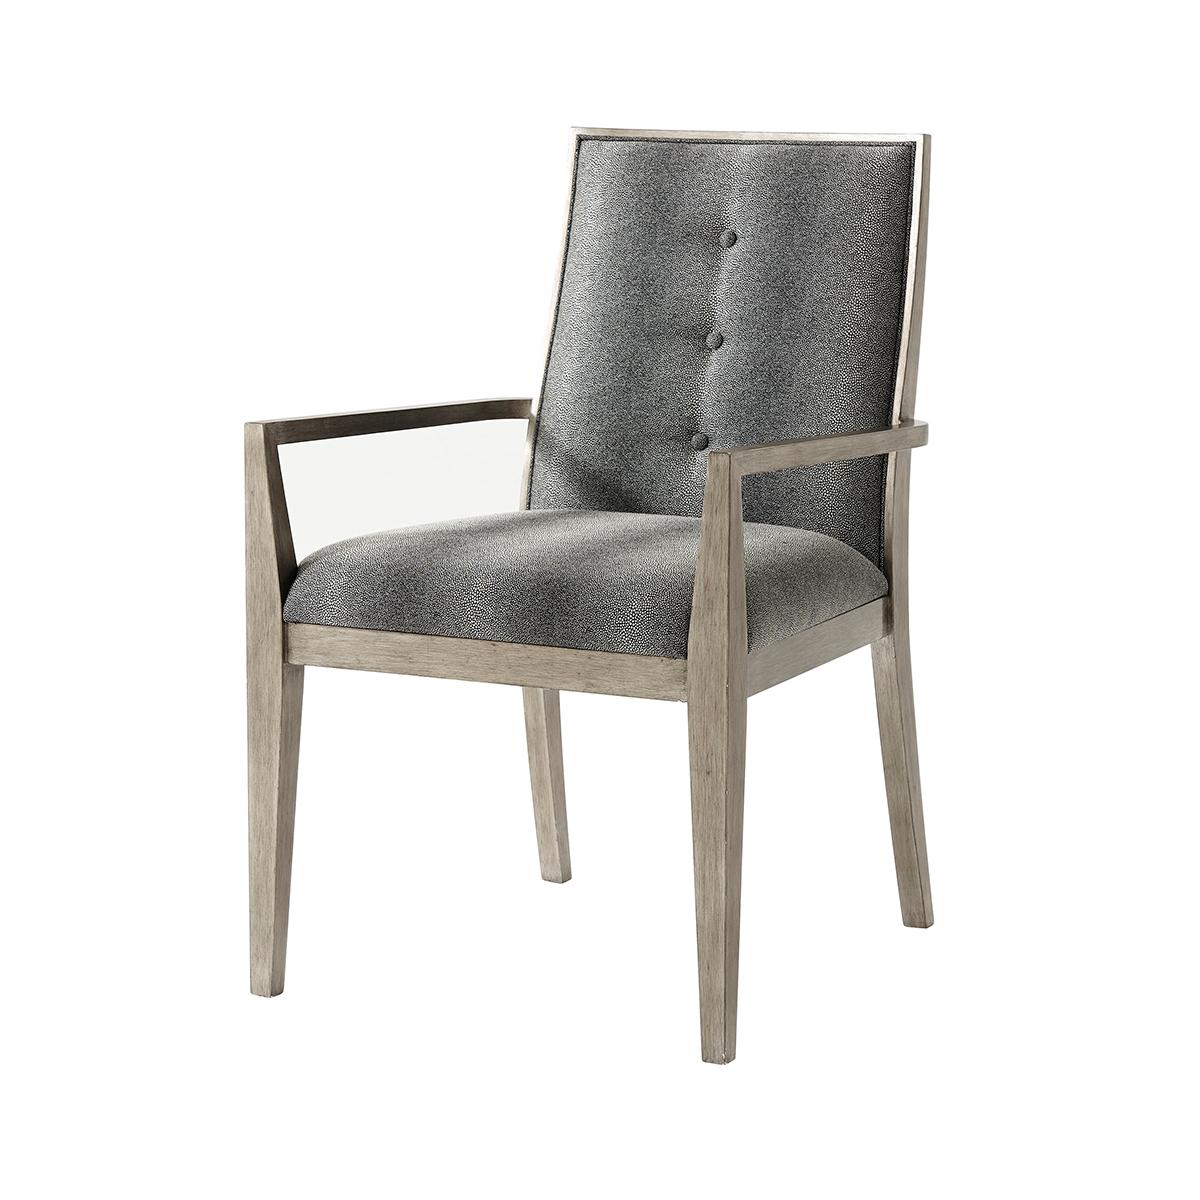 Two Dining armchairs with a hand-brushed pewter finish, with an upholstered back, outside back and seat on square tapered legs. 

Dimensions: 23